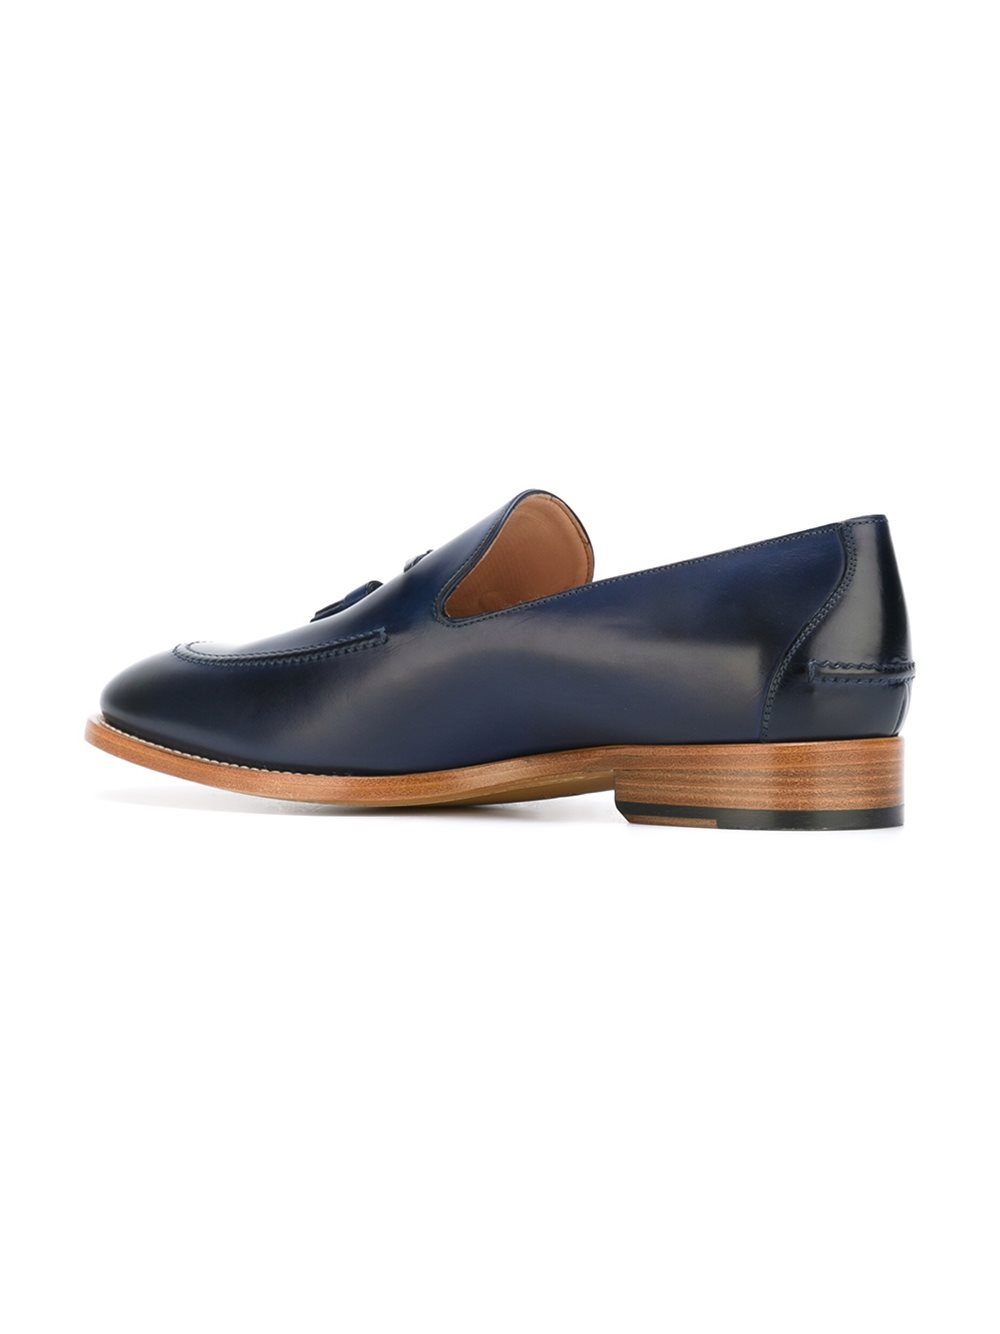 Happily Seeing Blue: Paul Smith Haring Loafer | SHOEOGRAPHY